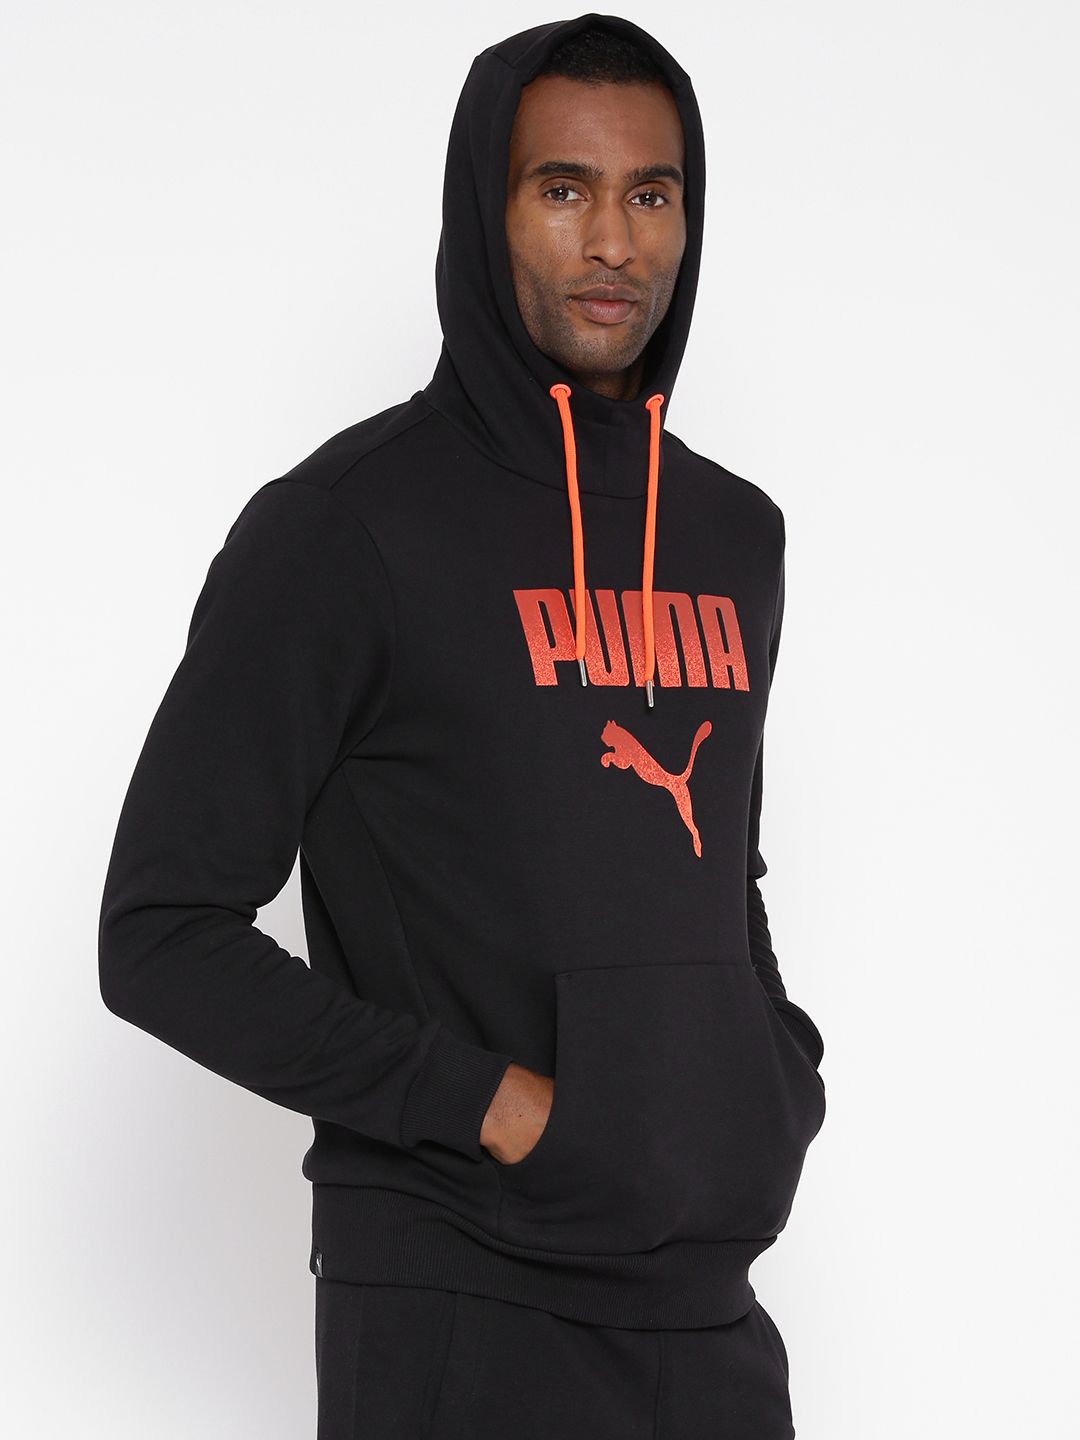 puma winter jackets price in india